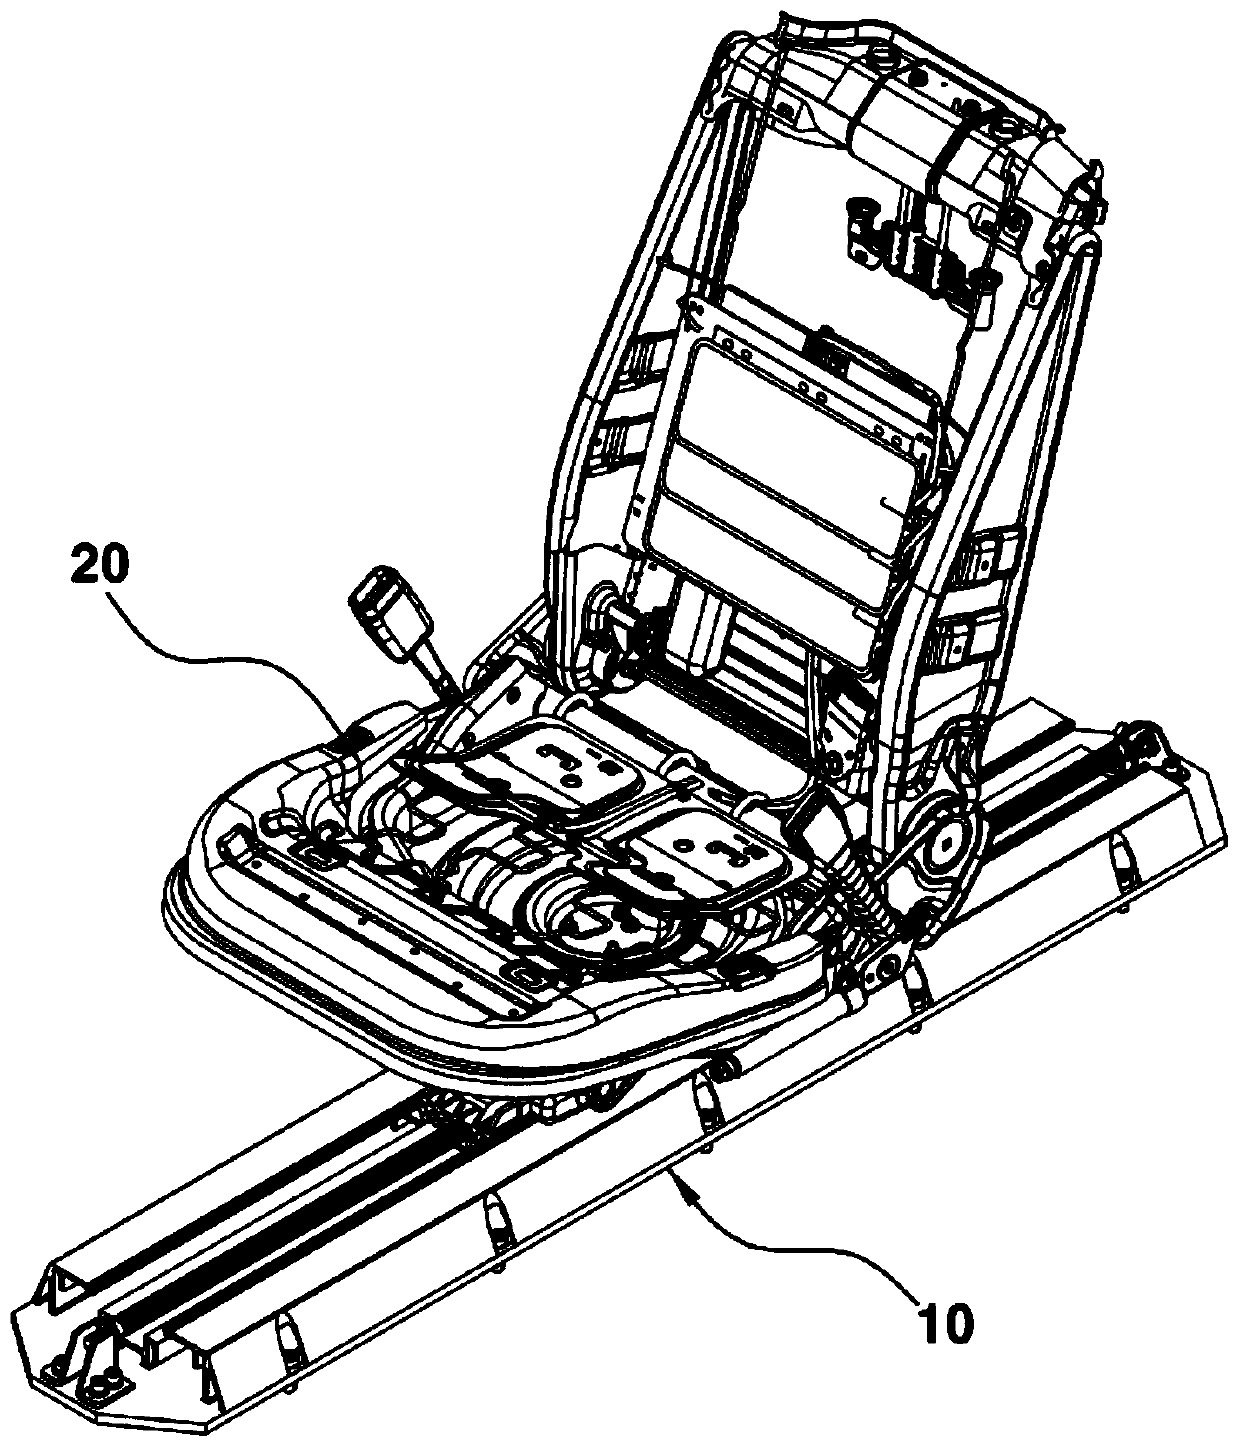 Seat track mechanism for vehicle seat